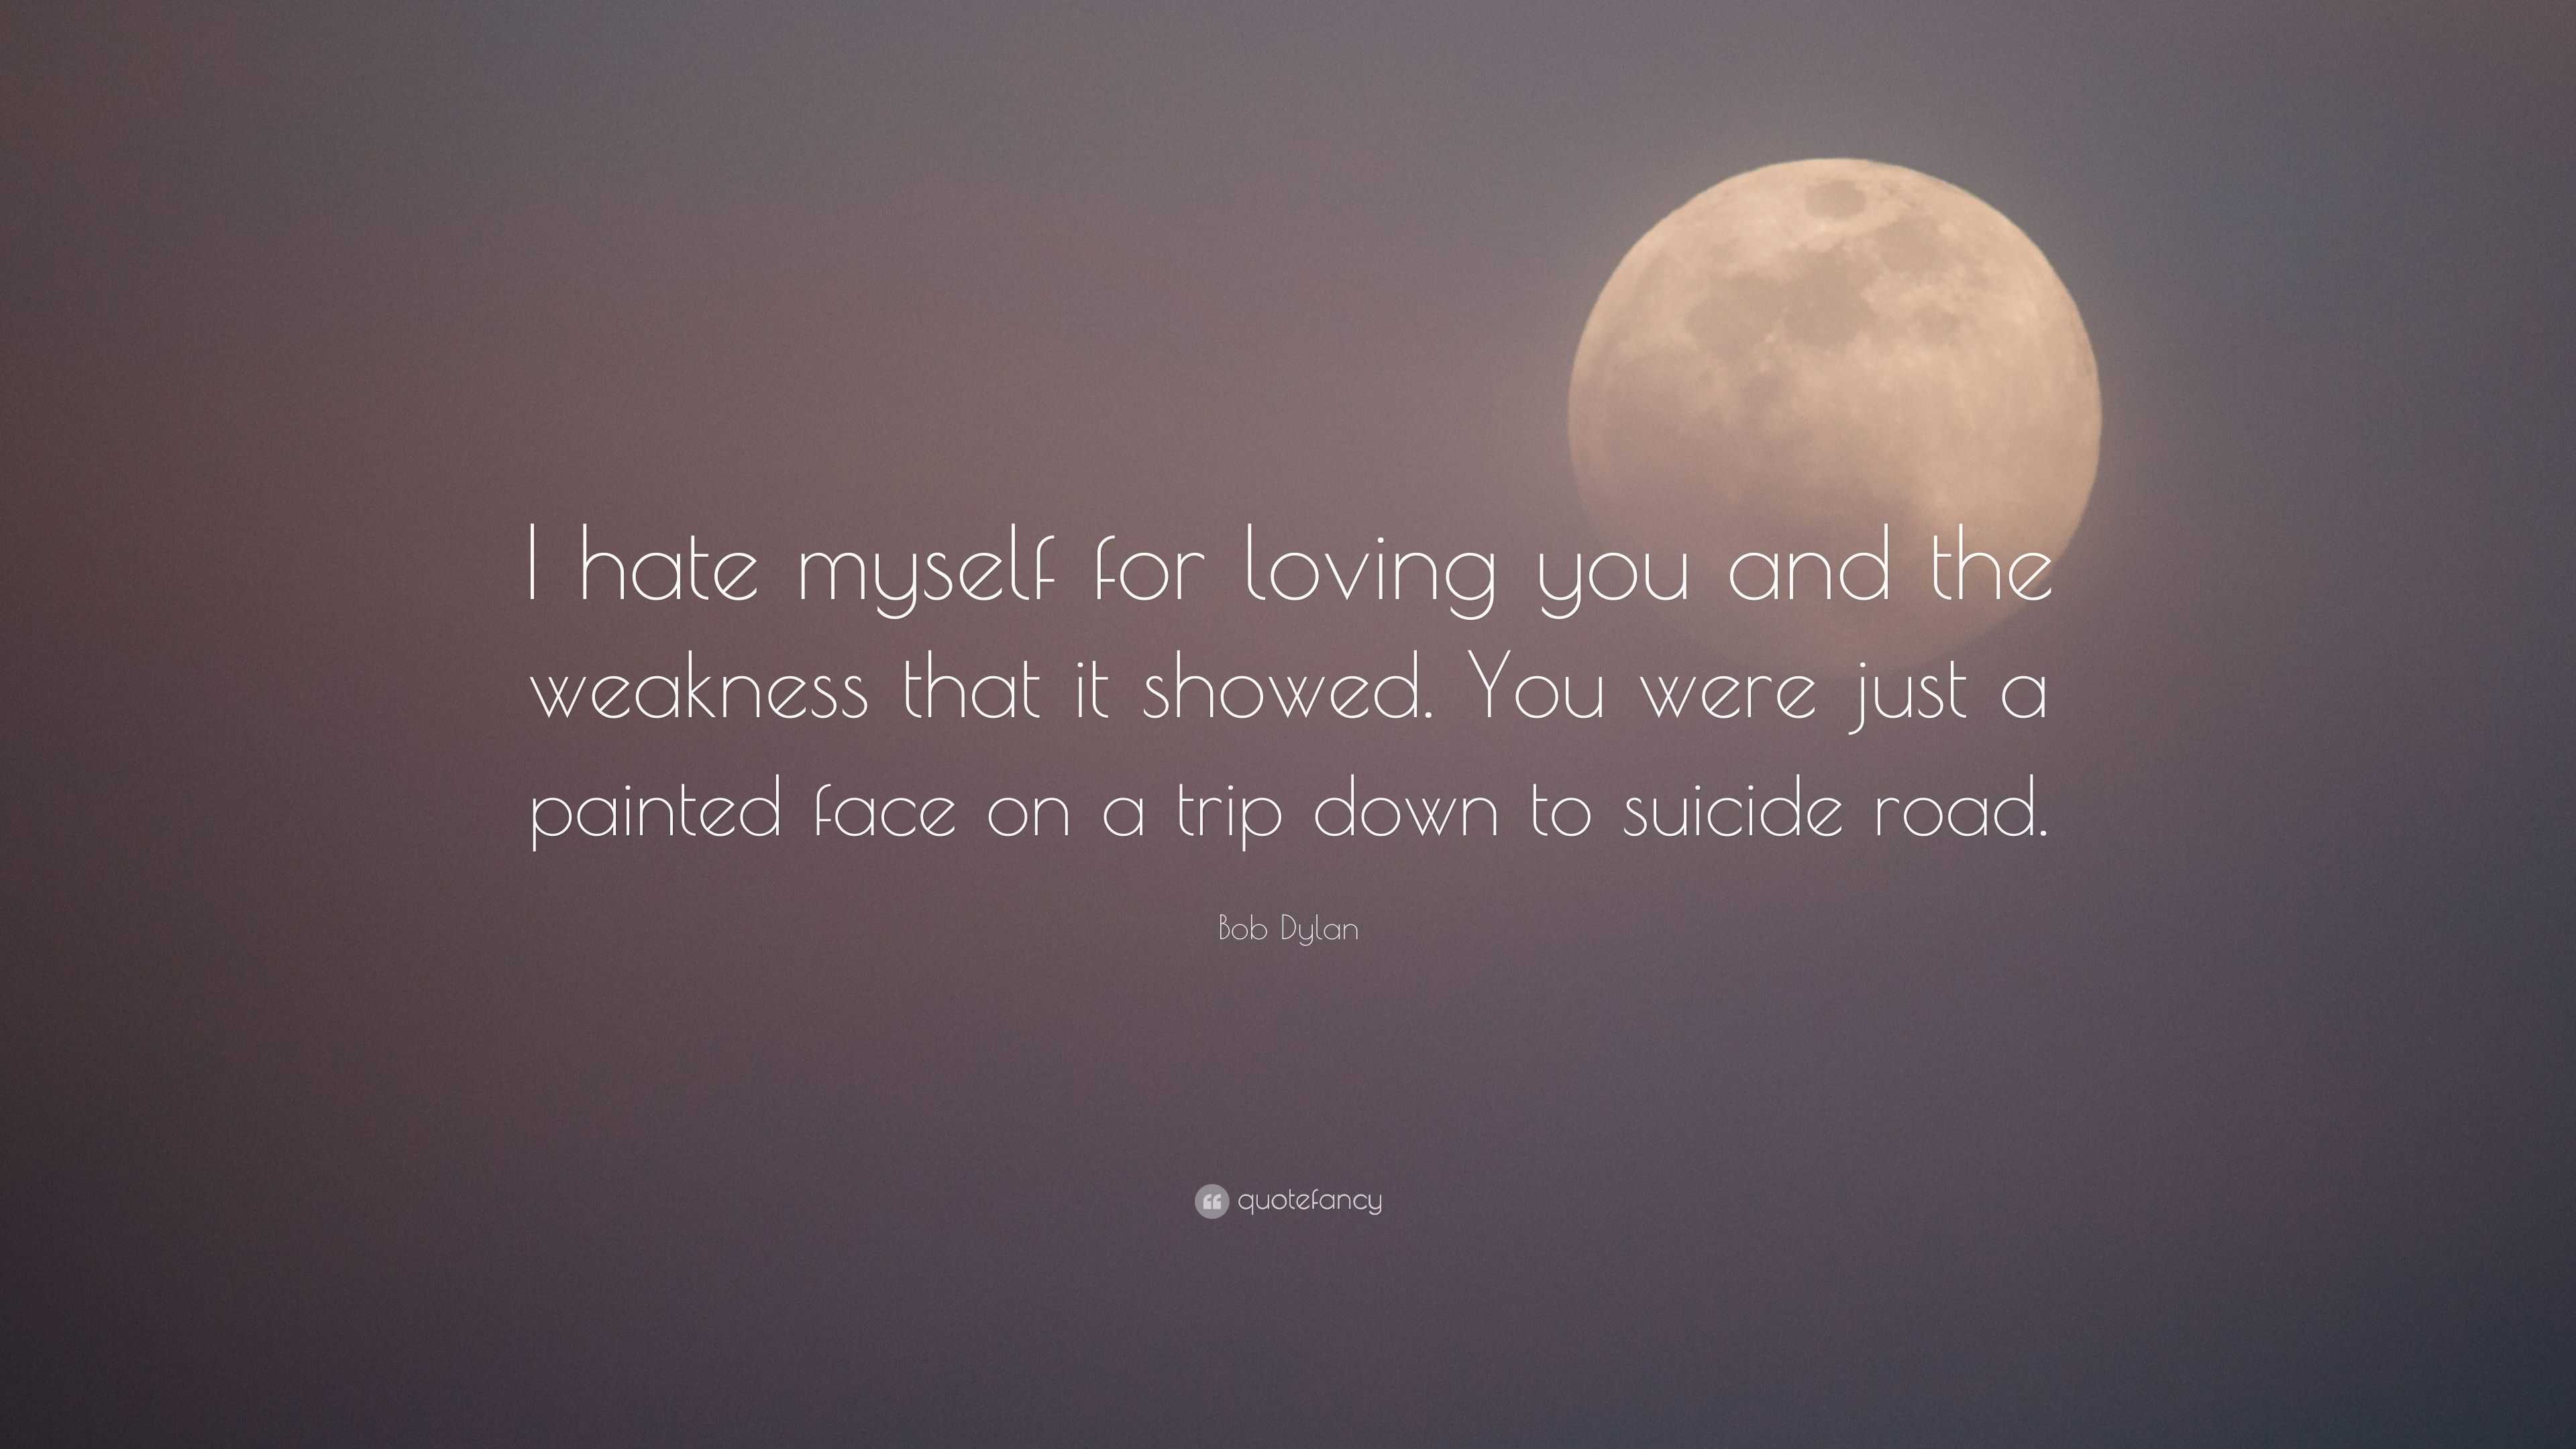 Bob Dylan Quote: “I hate myself for loving you and the weakness that it ...